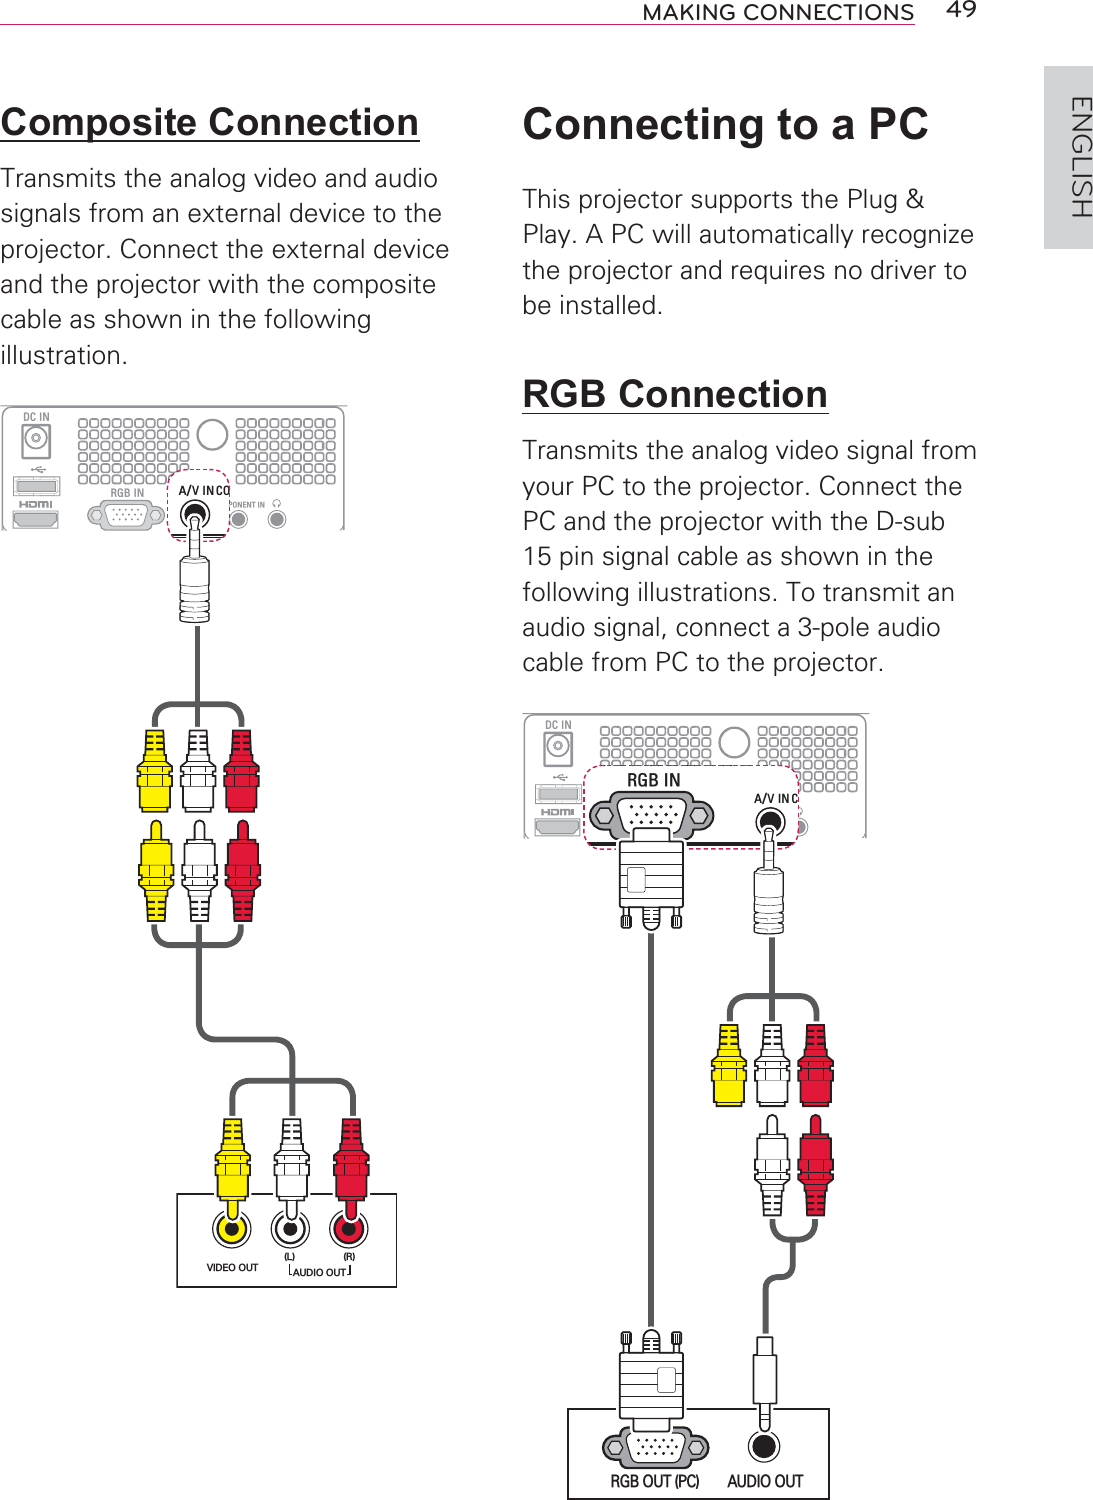 49MAKING CONNECTIONSENGLISHConnecting to a PCThis projector supports the Plug &amp; Play. A PC will automatically recognize the projector and requires no driver to be installed. RGB ConnectionTransmits the analog video signal from your PC to the projector. Connect the PC and the projector with the D-sub 15 pin signal cable as shown in the following illustrations. To transmit an audio signal, connect a 3-pole audio cable from PC to the projector.&apos;&amp;,15*%,1$9,1&amp;20321(17,15*%,1$9,1&amp;AUDIO OUTRGB OUT (PC) Composite ConnectionTransmits the analog video and audio signals from an external device to the projector. Connect the external device and the projector with the composite cable as shown in the following illustration.&apos;&amp;,15*%,1$9,1&amp;20321(17,1$9,1&amp;2VIDEO OUT(L) (R)AUDIO OUT